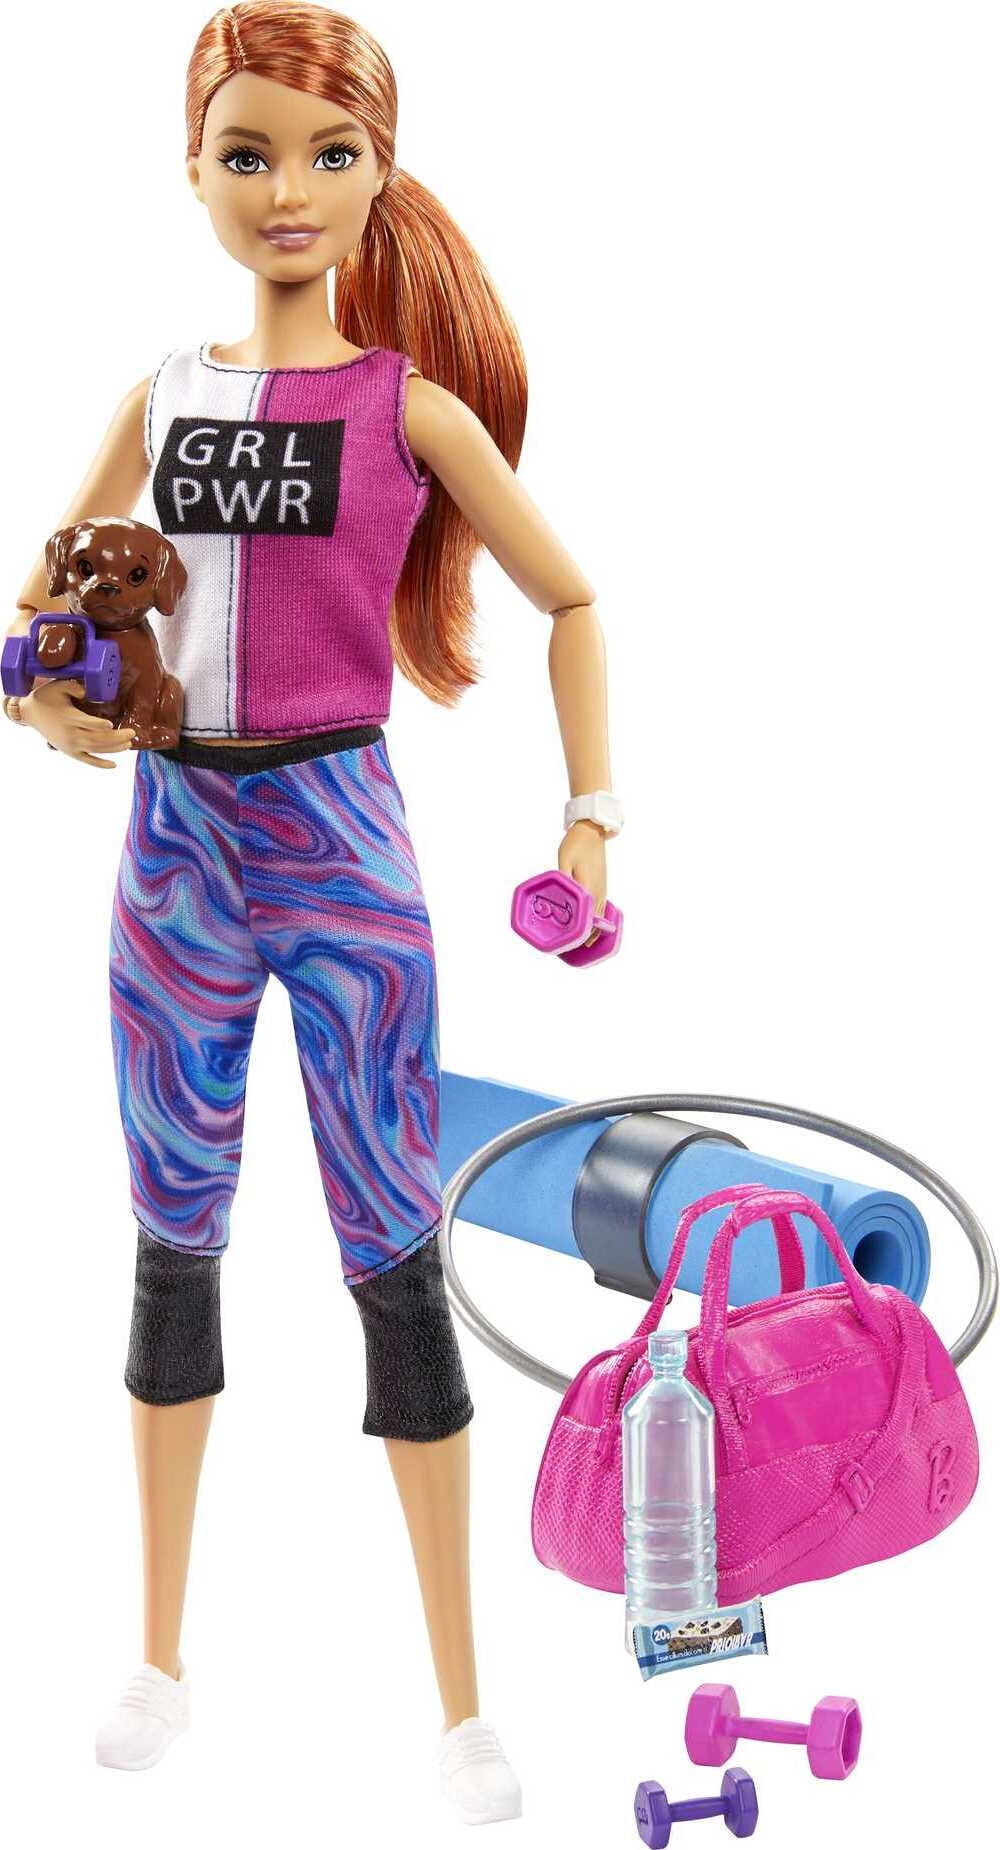 Barbie Accessories Pack With 11 Sunday Funday Storytelling Pieces